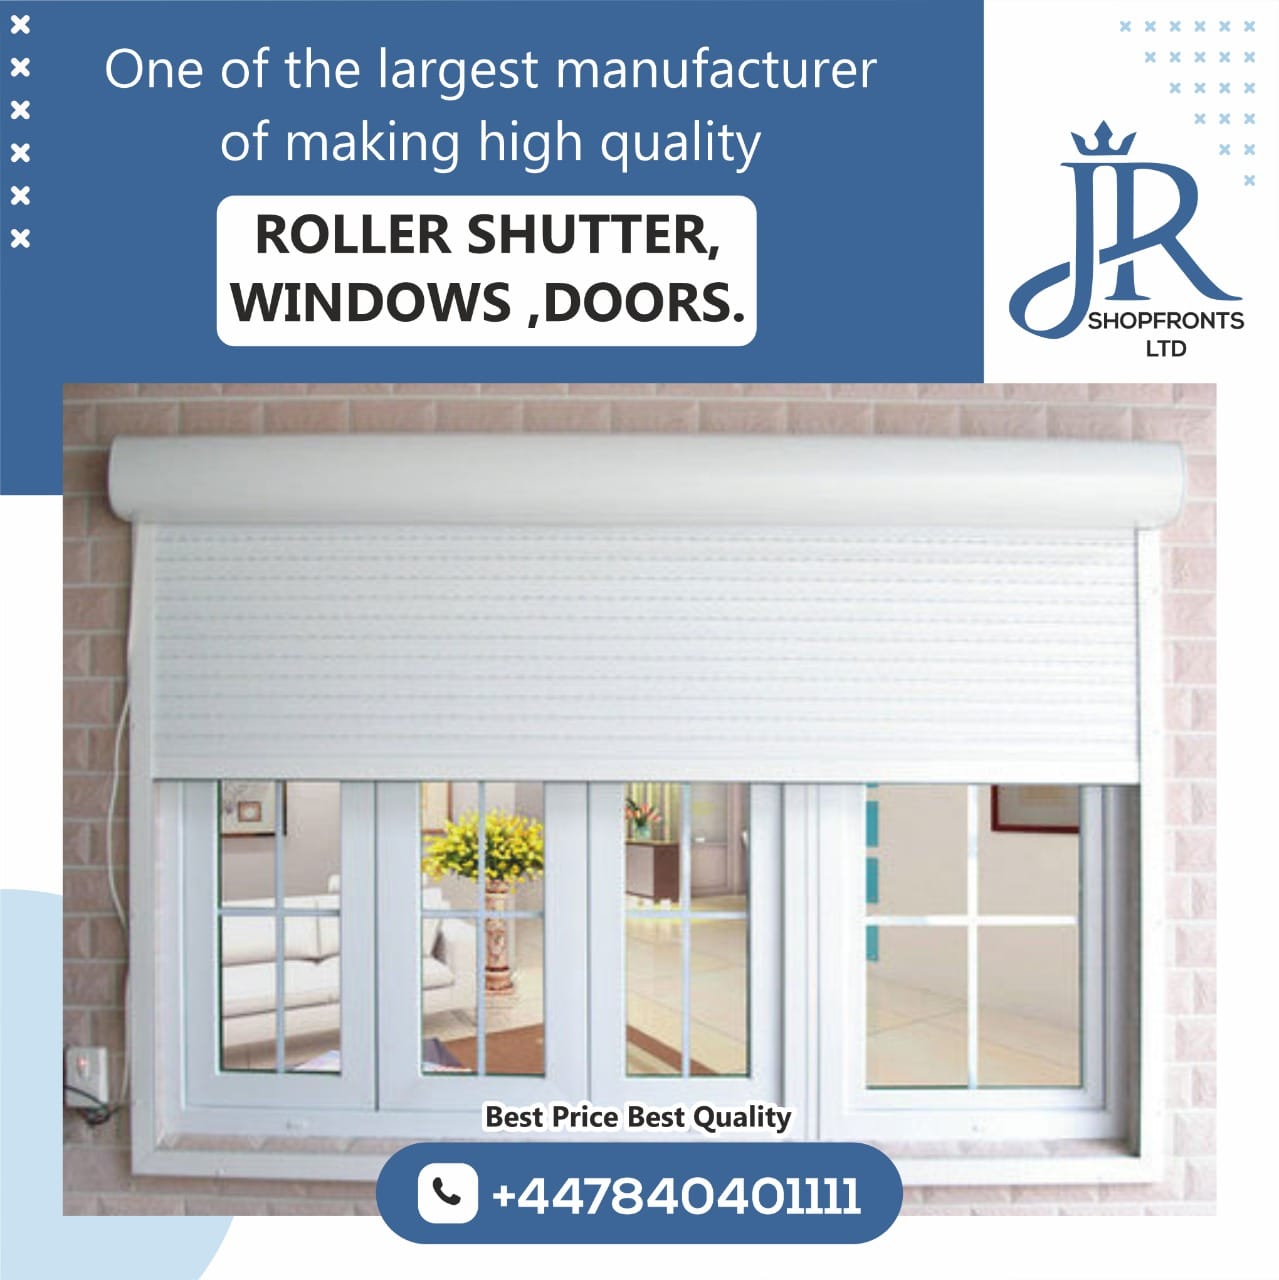 Shutter Company In Perth, shutter complany in Perth, doors manufactuers in Perth, shutters manufacturers in Perth, roller shutters manufacturers in Perth, doors manufacturers in Perth, Shutter Company In Perth